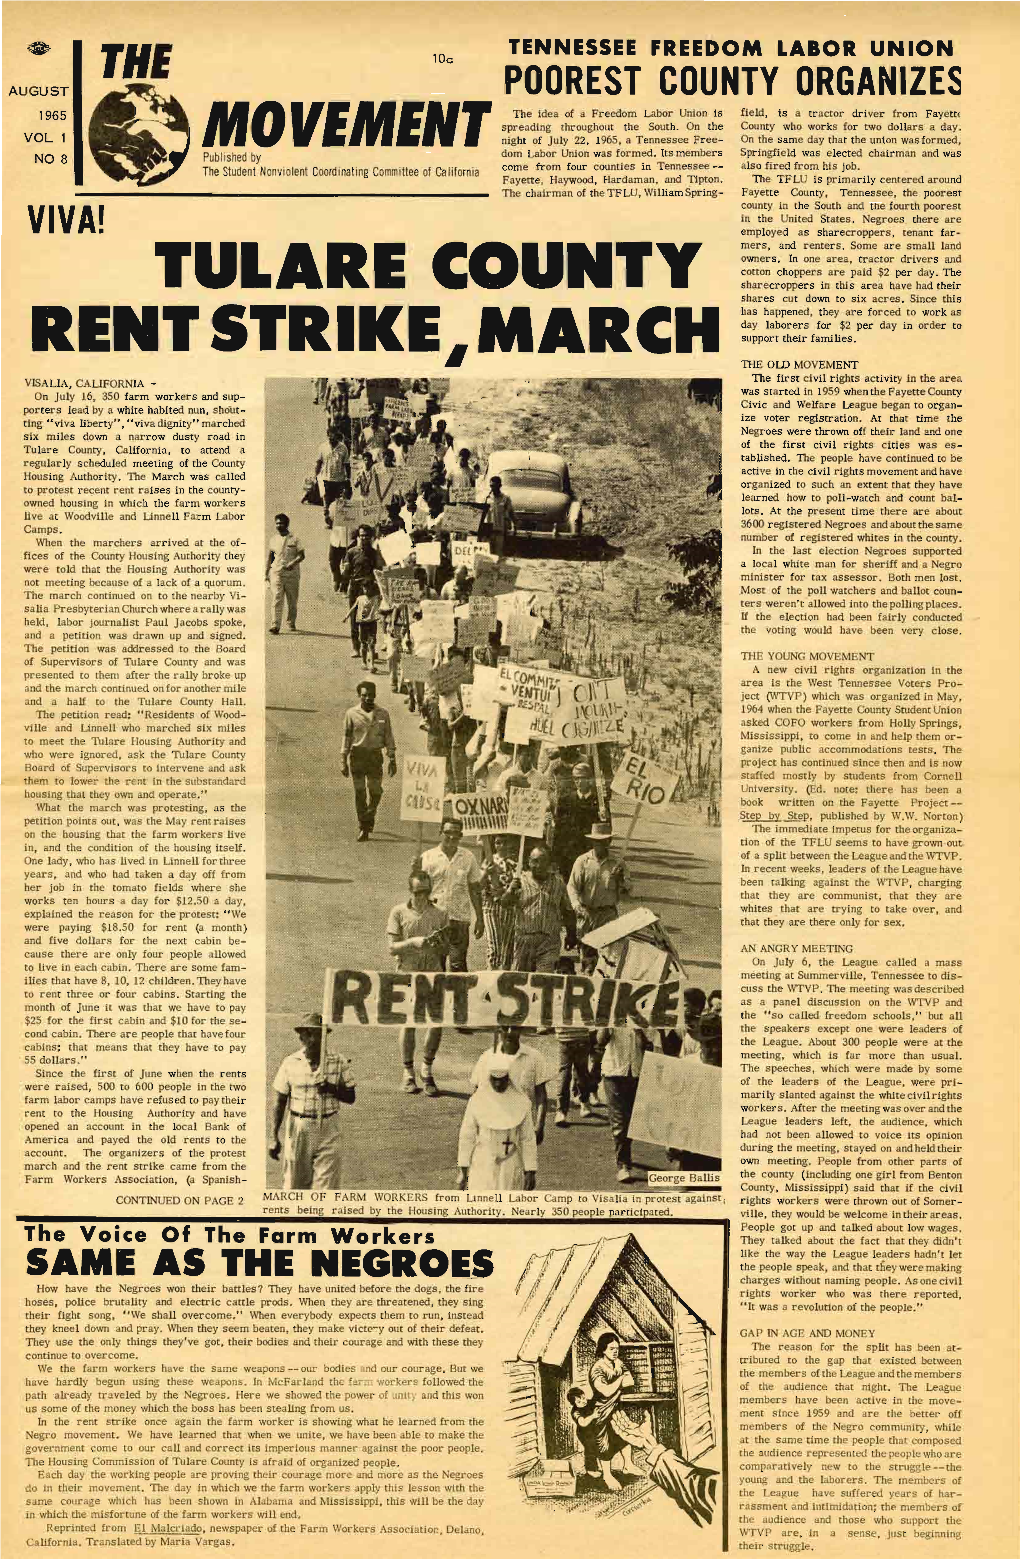 The Movement, August 1965. Vol. 1 No. 8